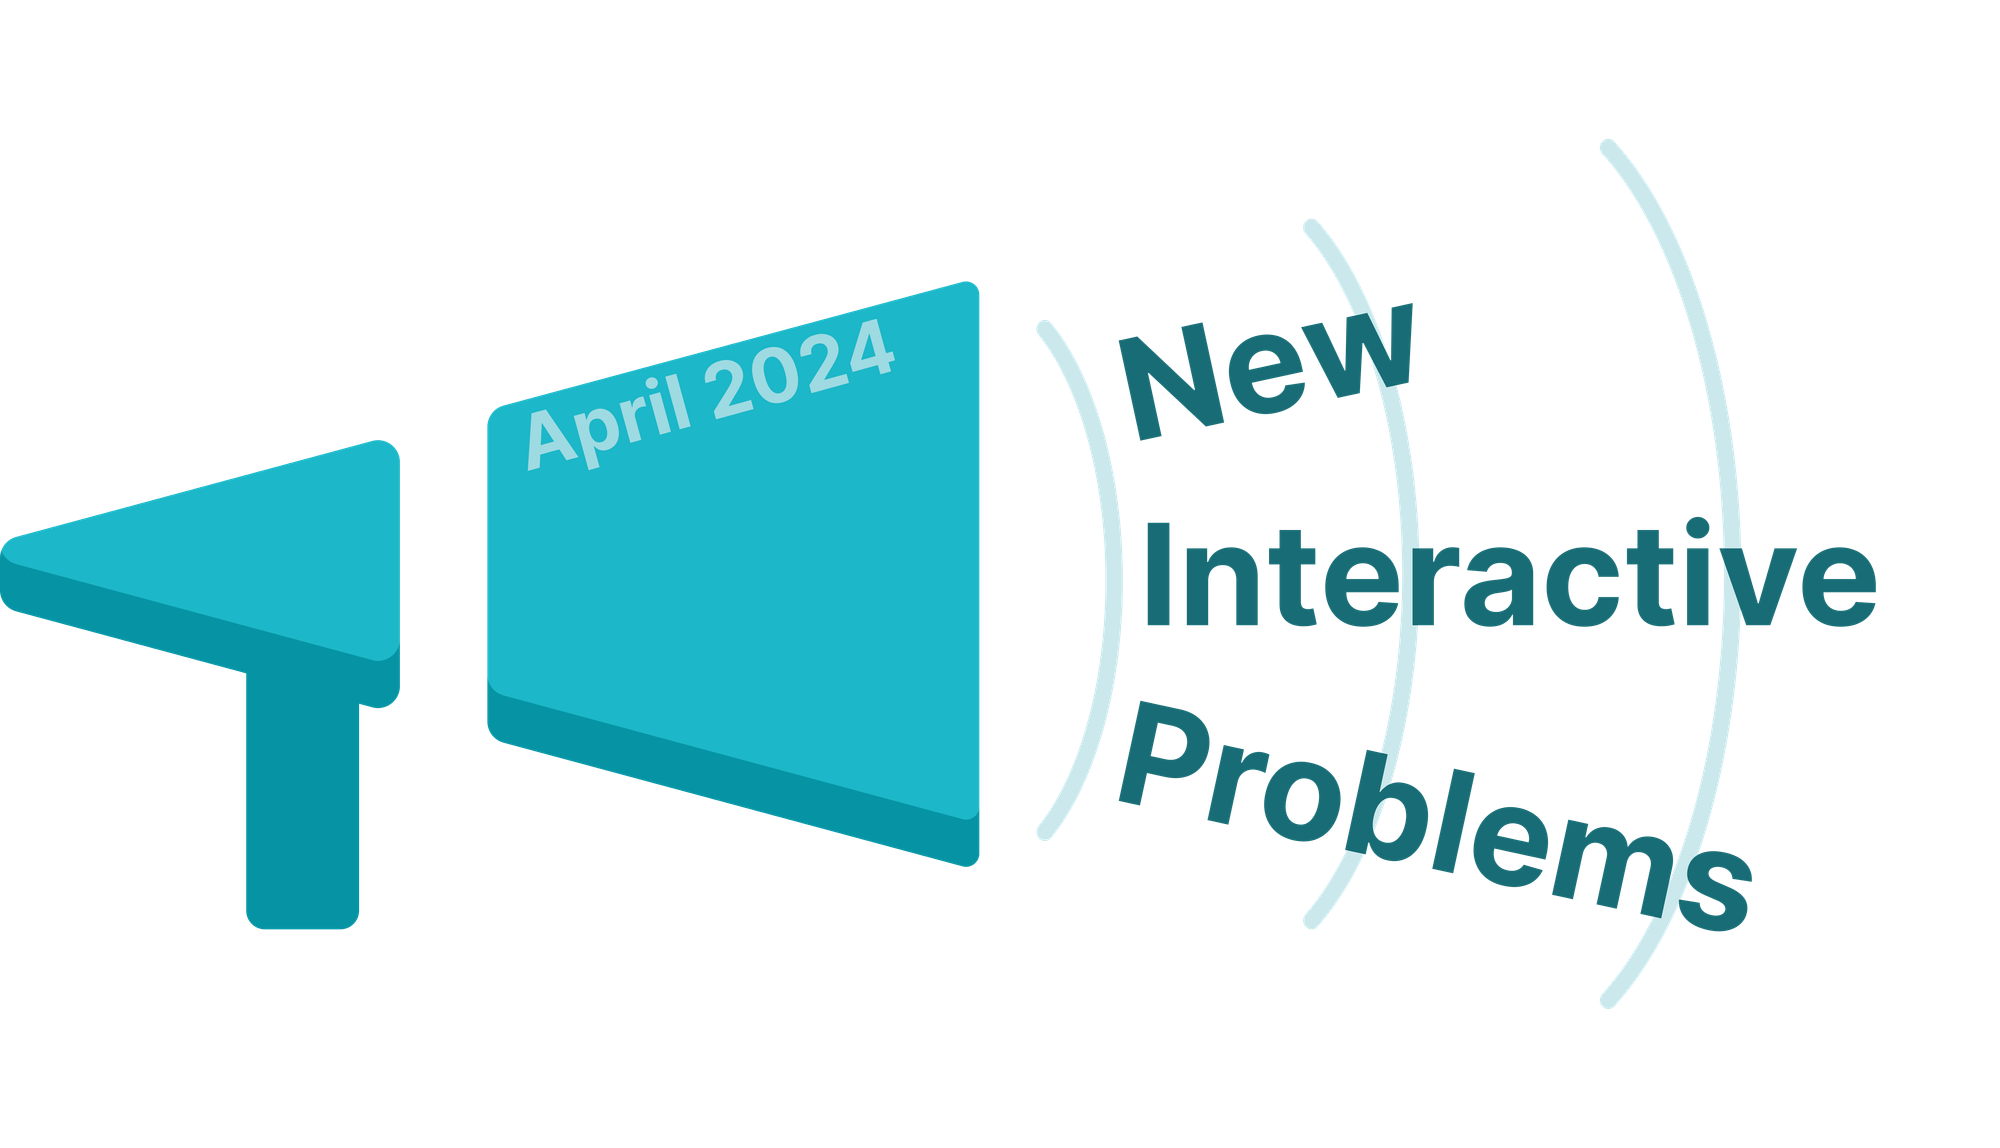 New Interactive Problems in April 2024